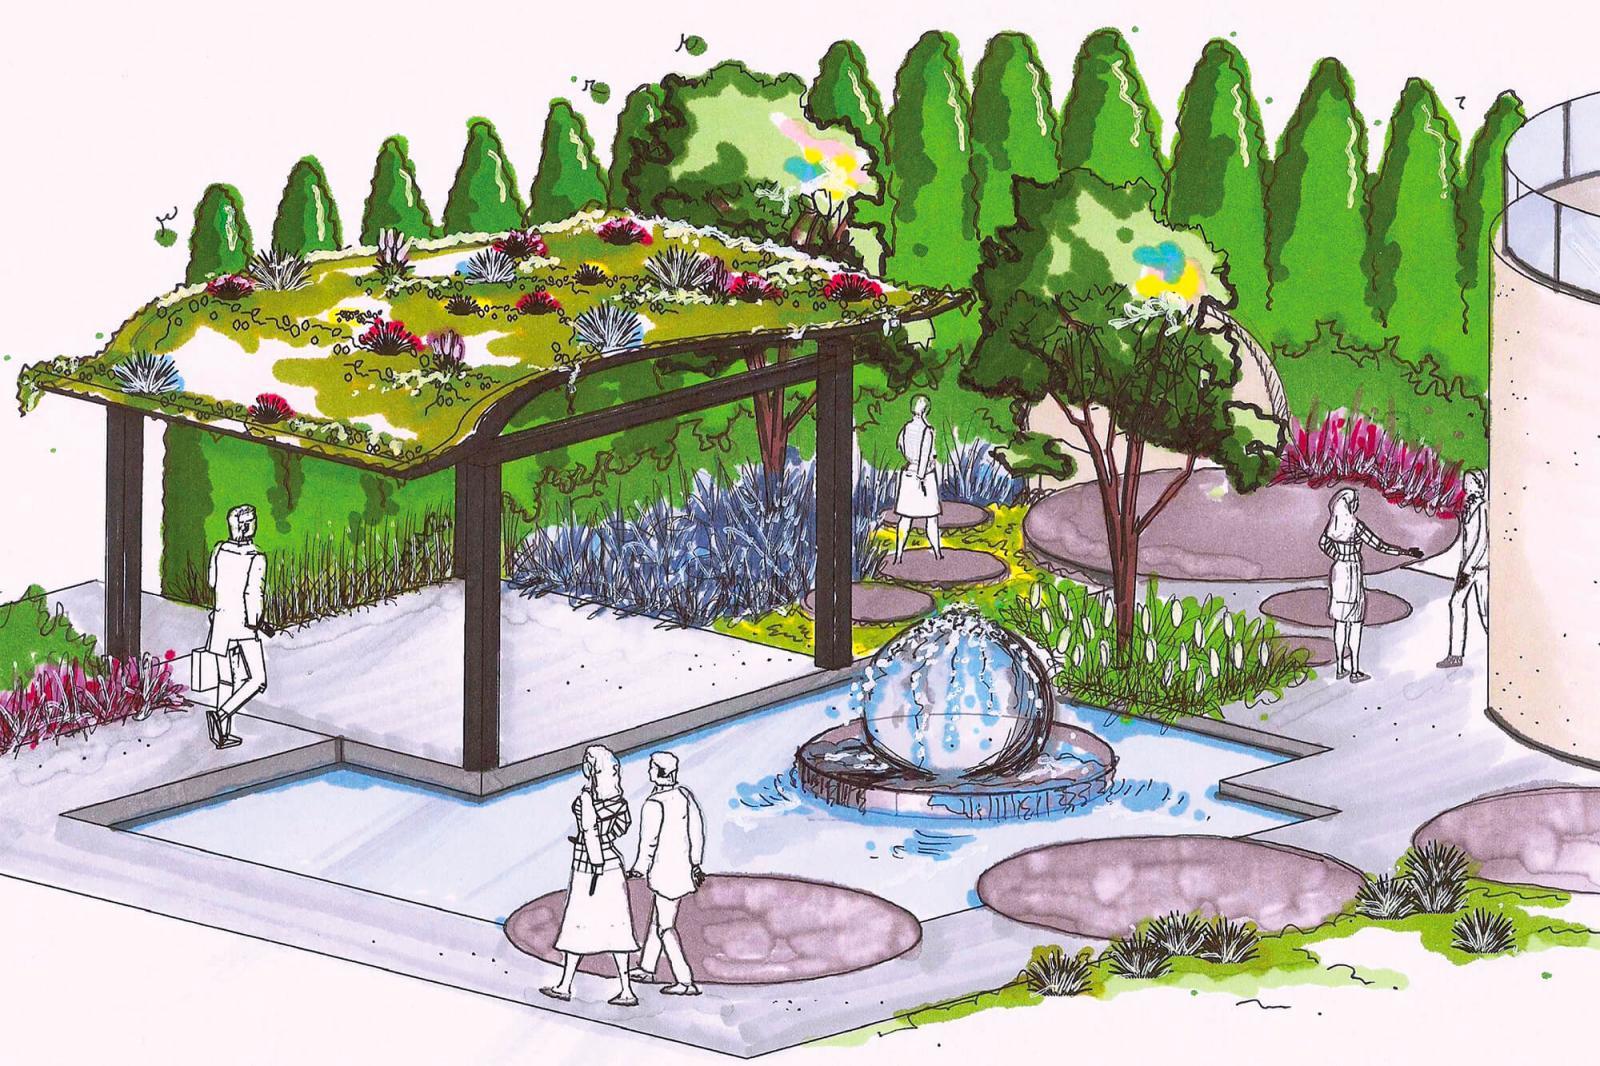 Considered the most ambitious project ever built by Landscape Ontario members, the feature garden at Canada Blooms will embrace water, spectacular plants, unique hardscaping materials and superb craftsmanship.